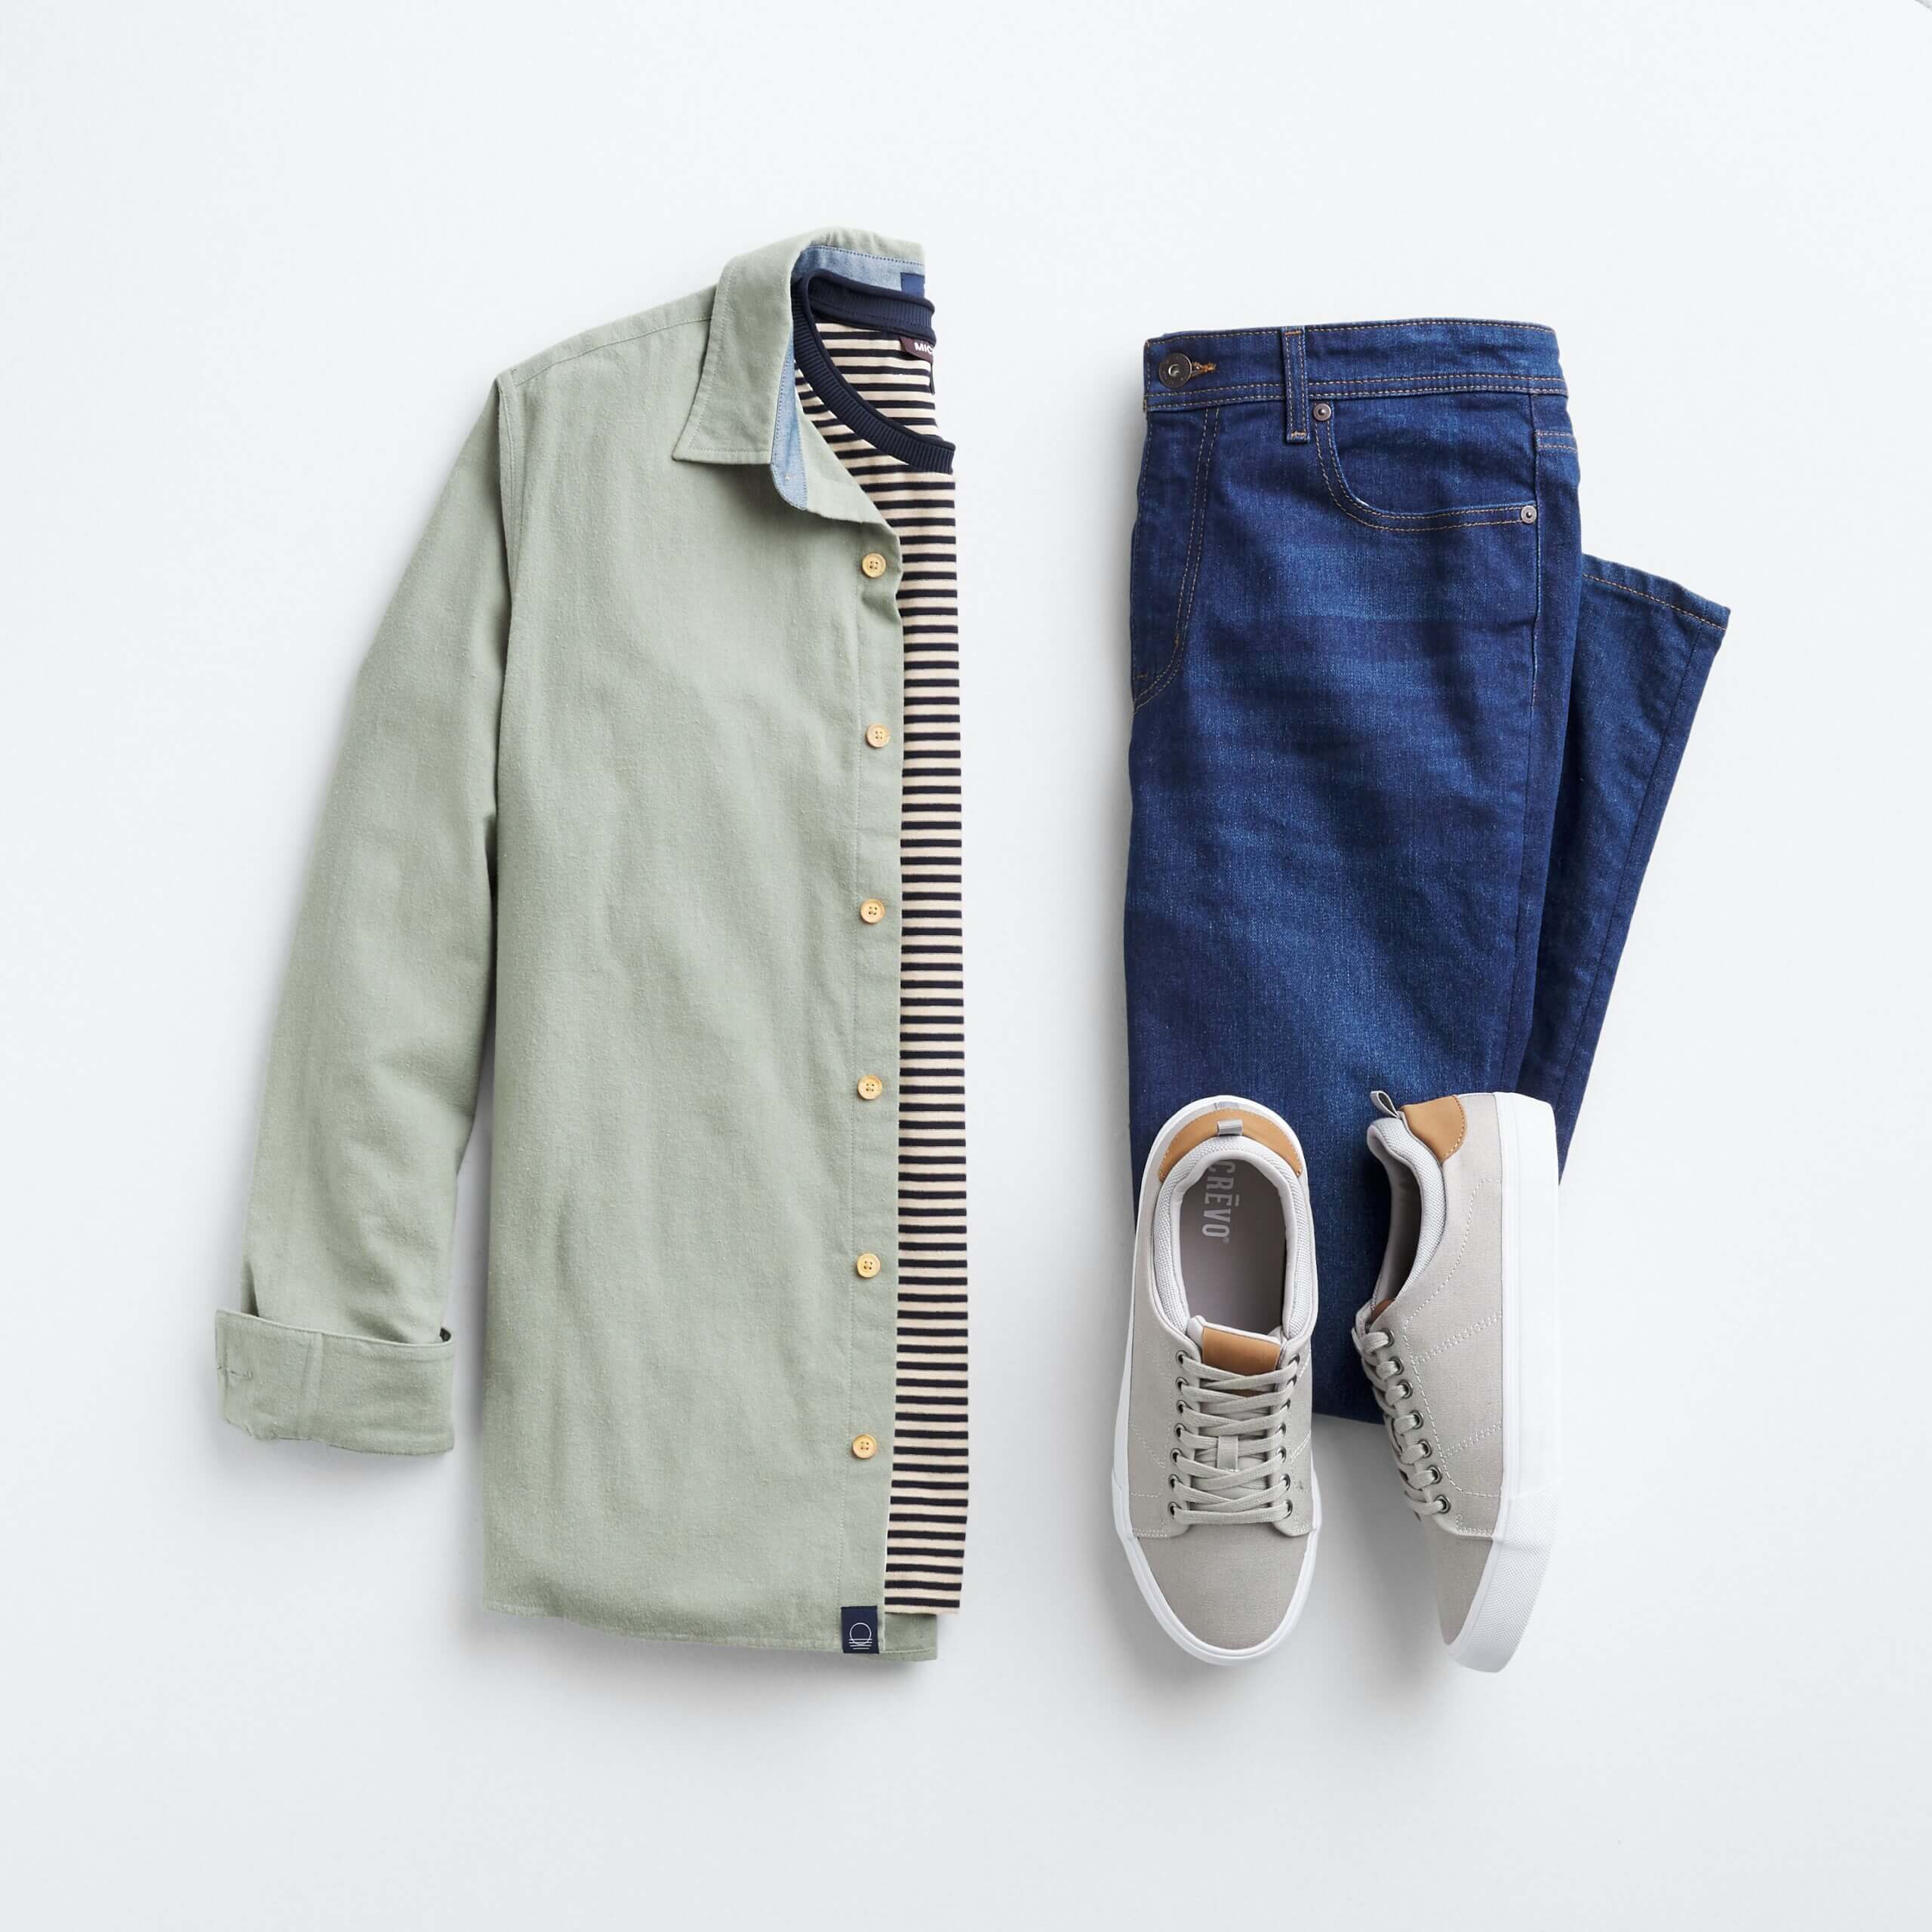 Stitch Fix men's outfit laydown featuring green button-down over striped tee, next to blue jeans and taupe sneakers. 